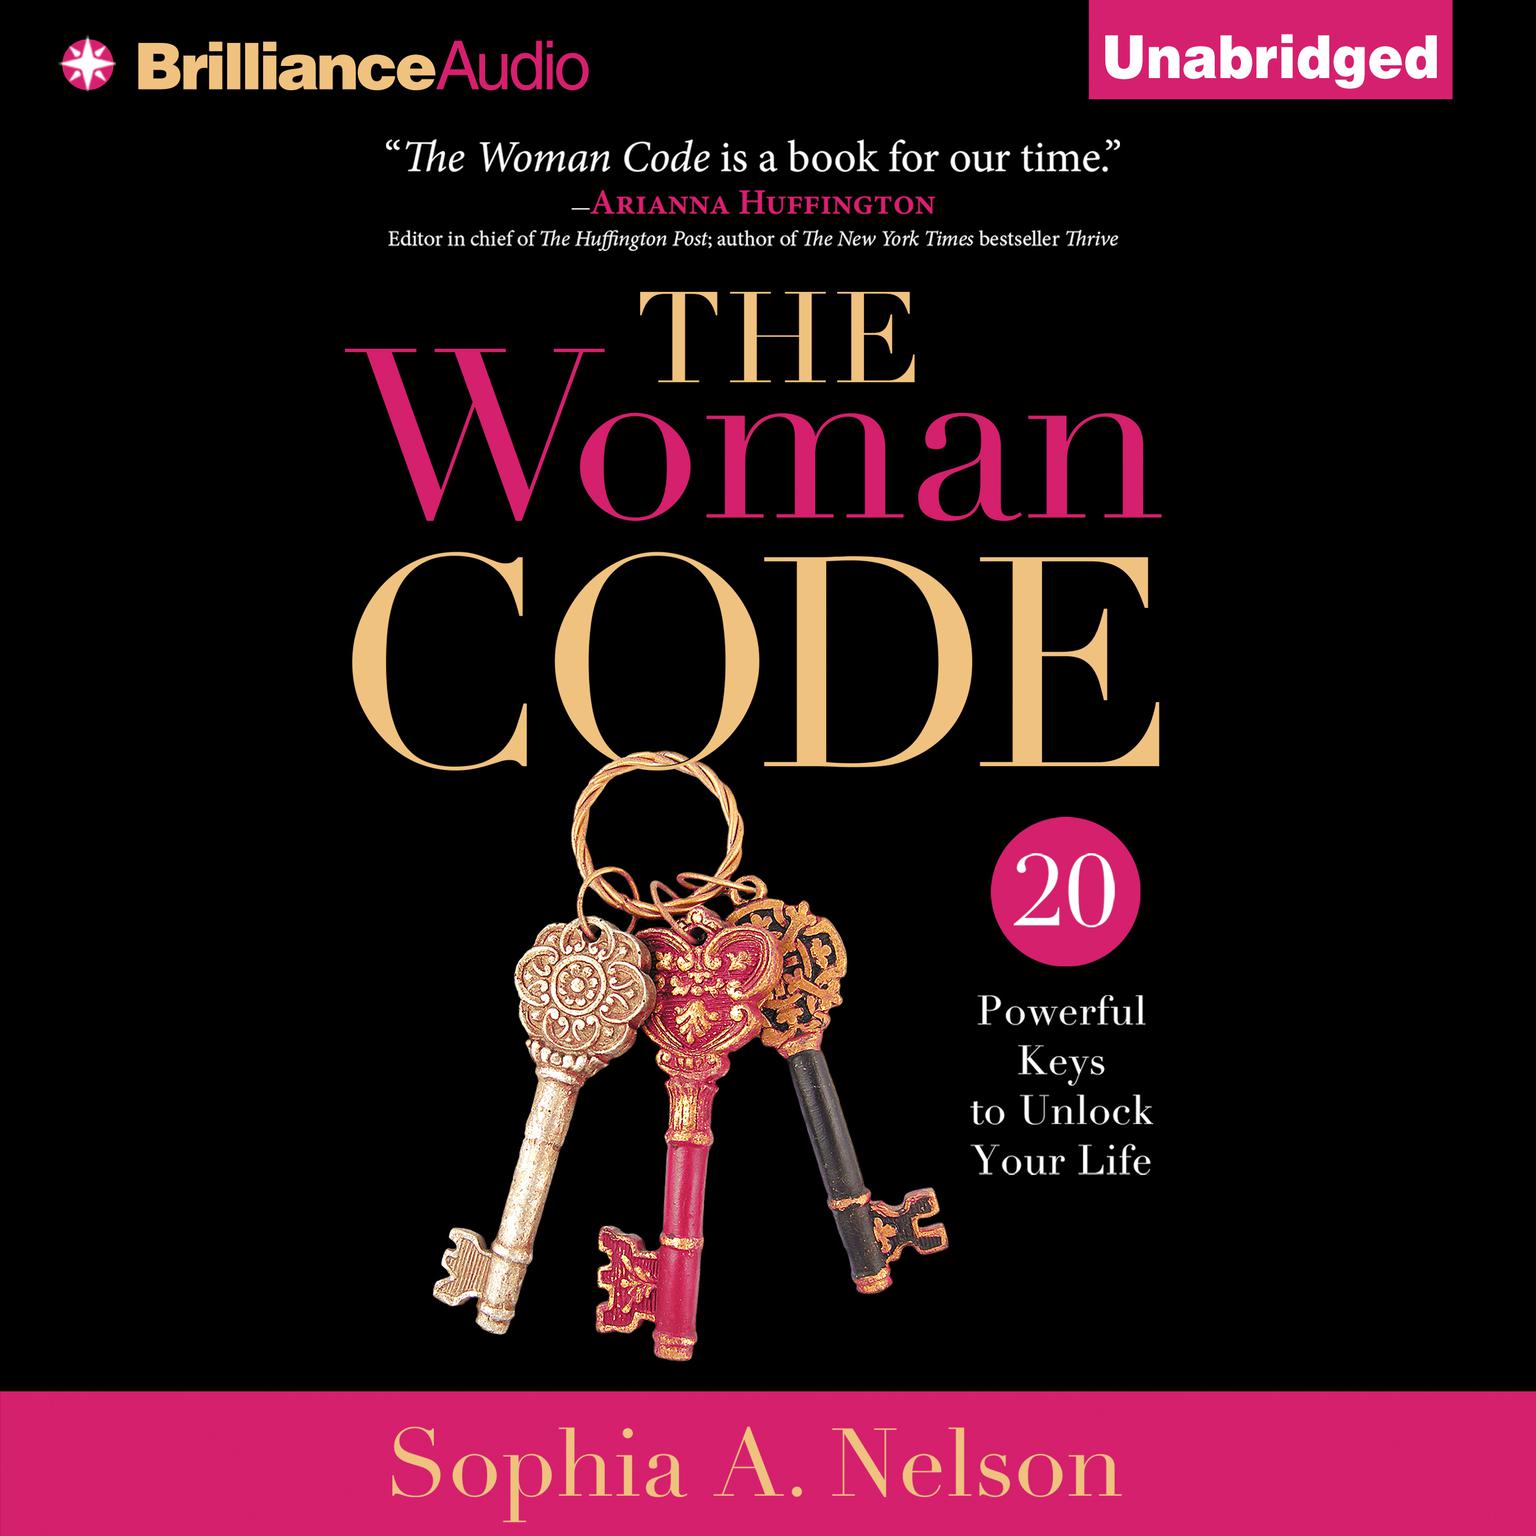 The Woman Code: 20 Powerful Keys to Unlock Your Life Audiobook, by Sophia A. Nelson